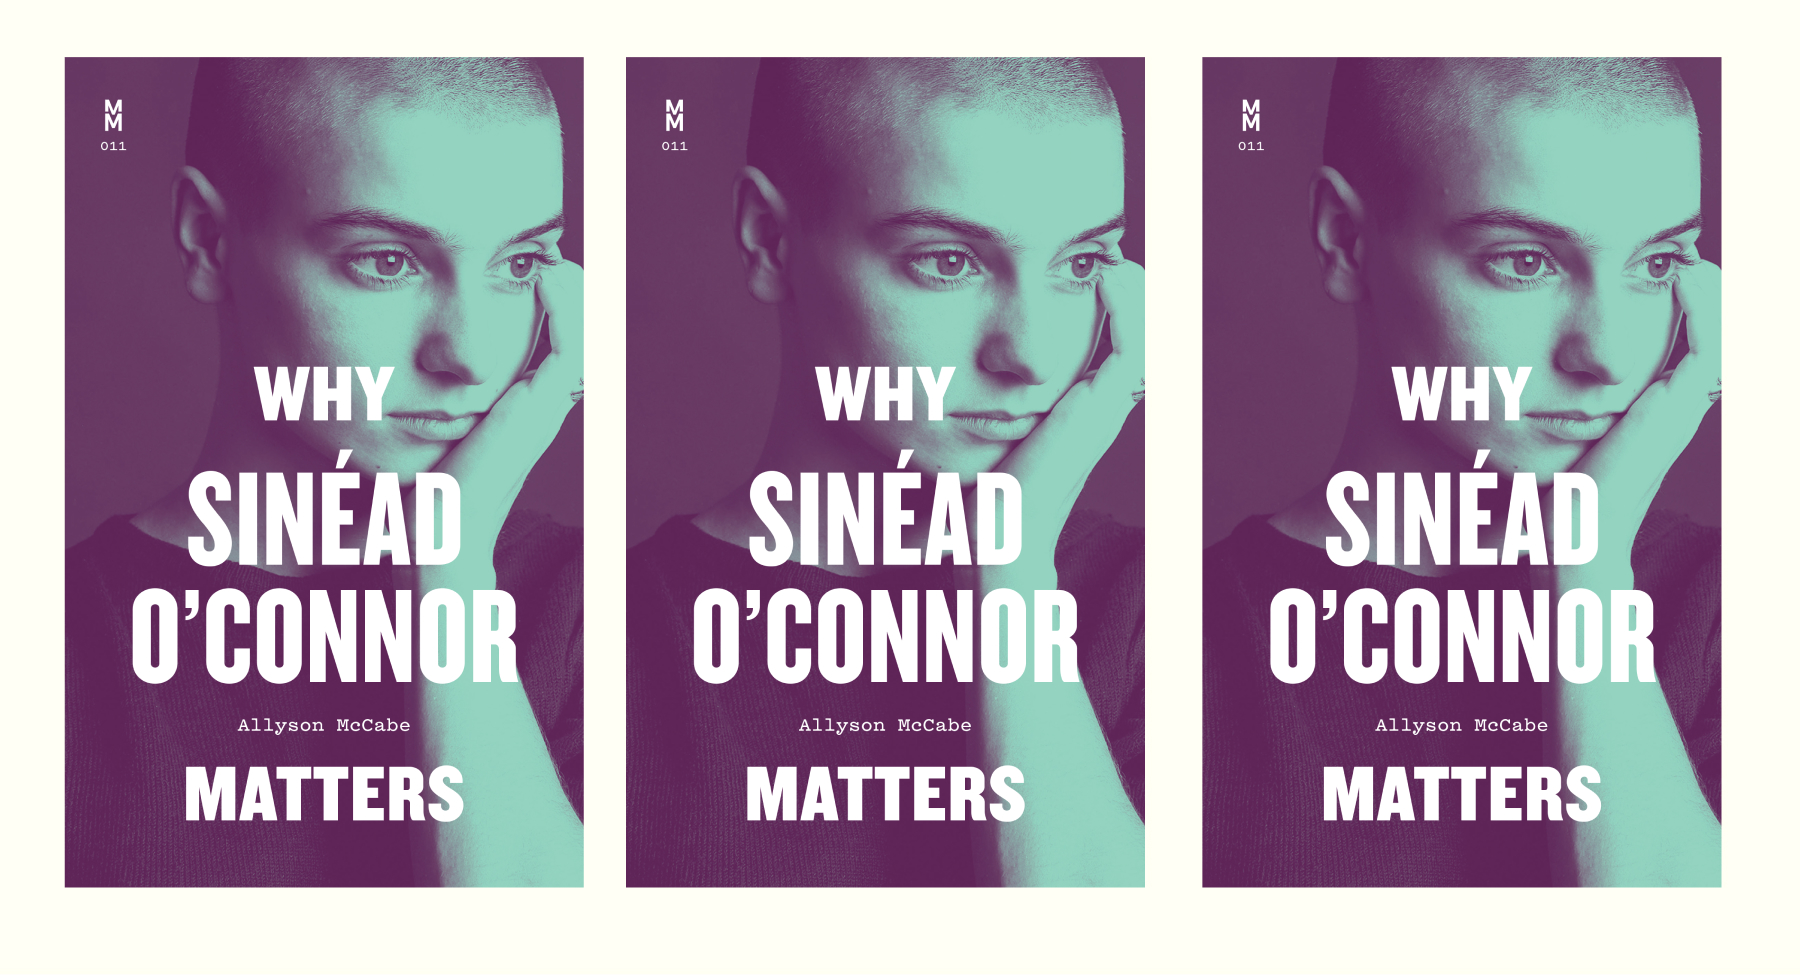 Article image for: 'Why Sinead O'Connor Matters,' by Allyson McCabe: An Excerpt